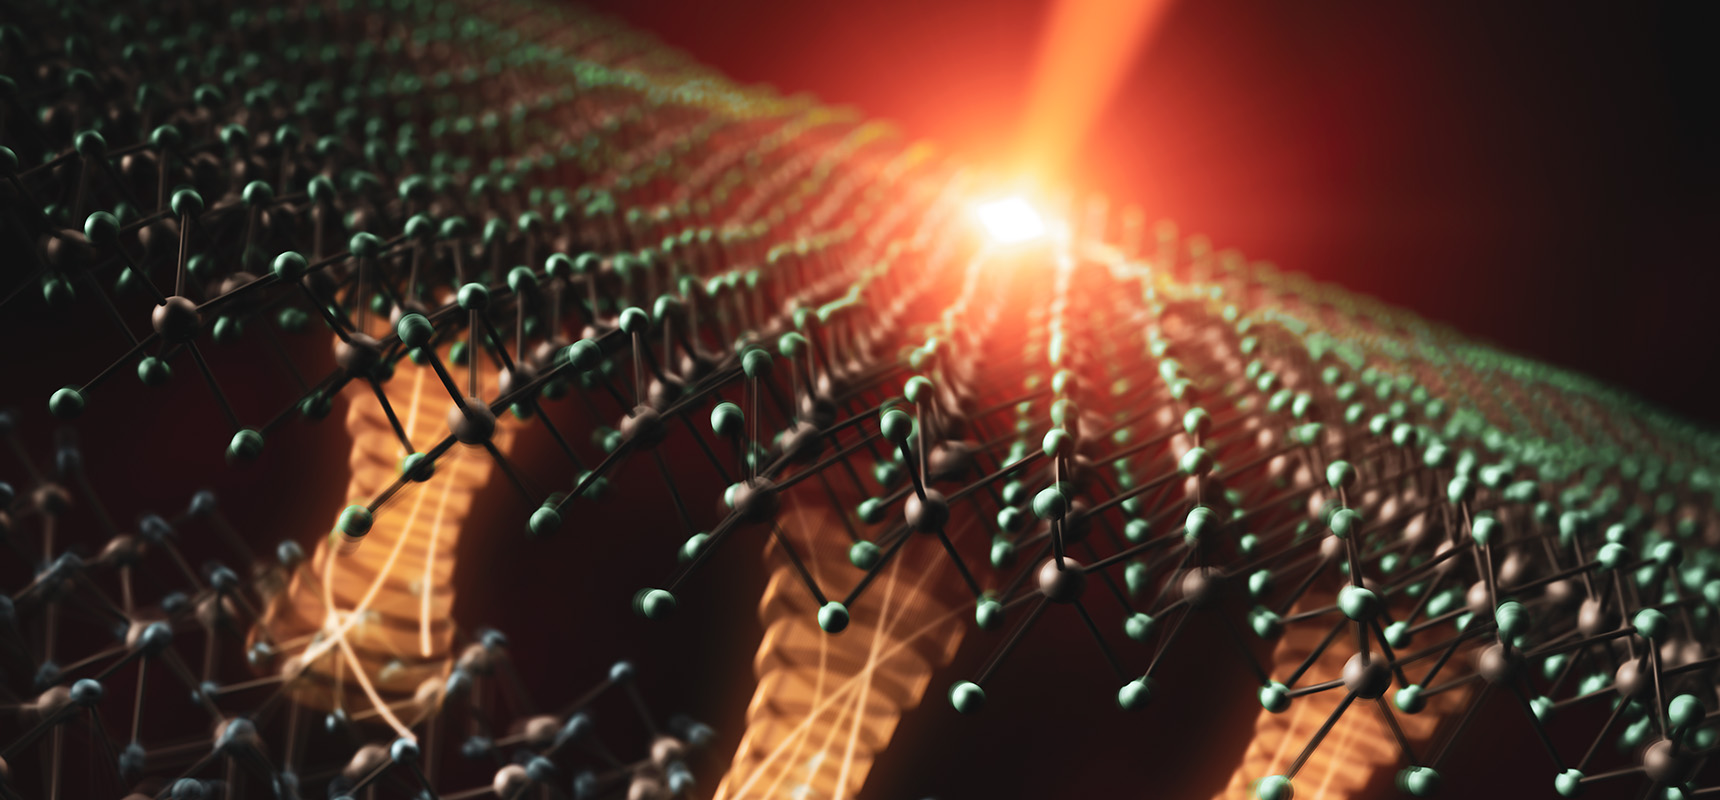 Artistic depiction of electron transfer driven by an ultrashort laser pulse, across an interface between two atomically-thin materials.